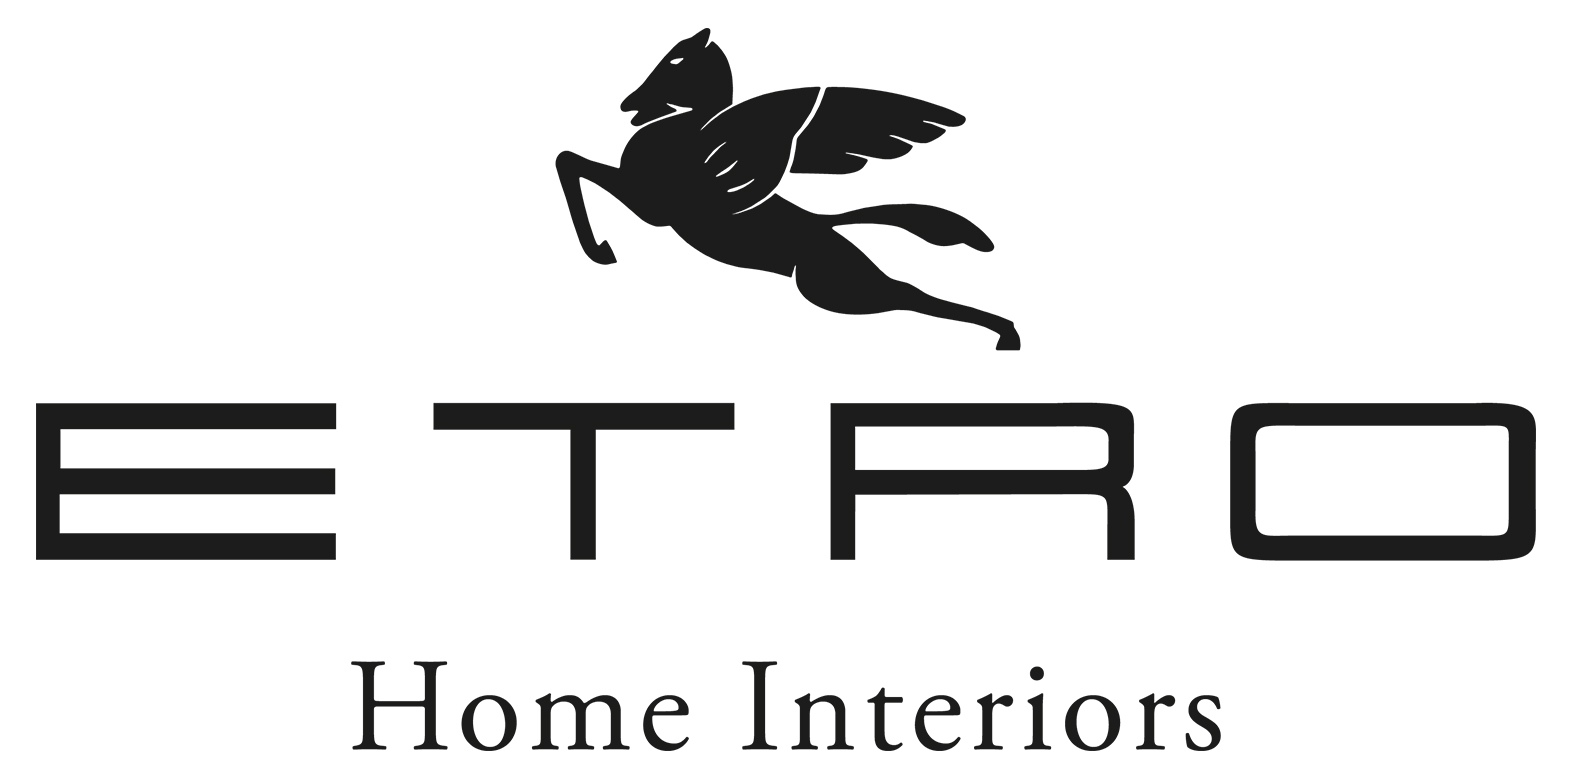 Etro Home Interiors - Neutral is the new color